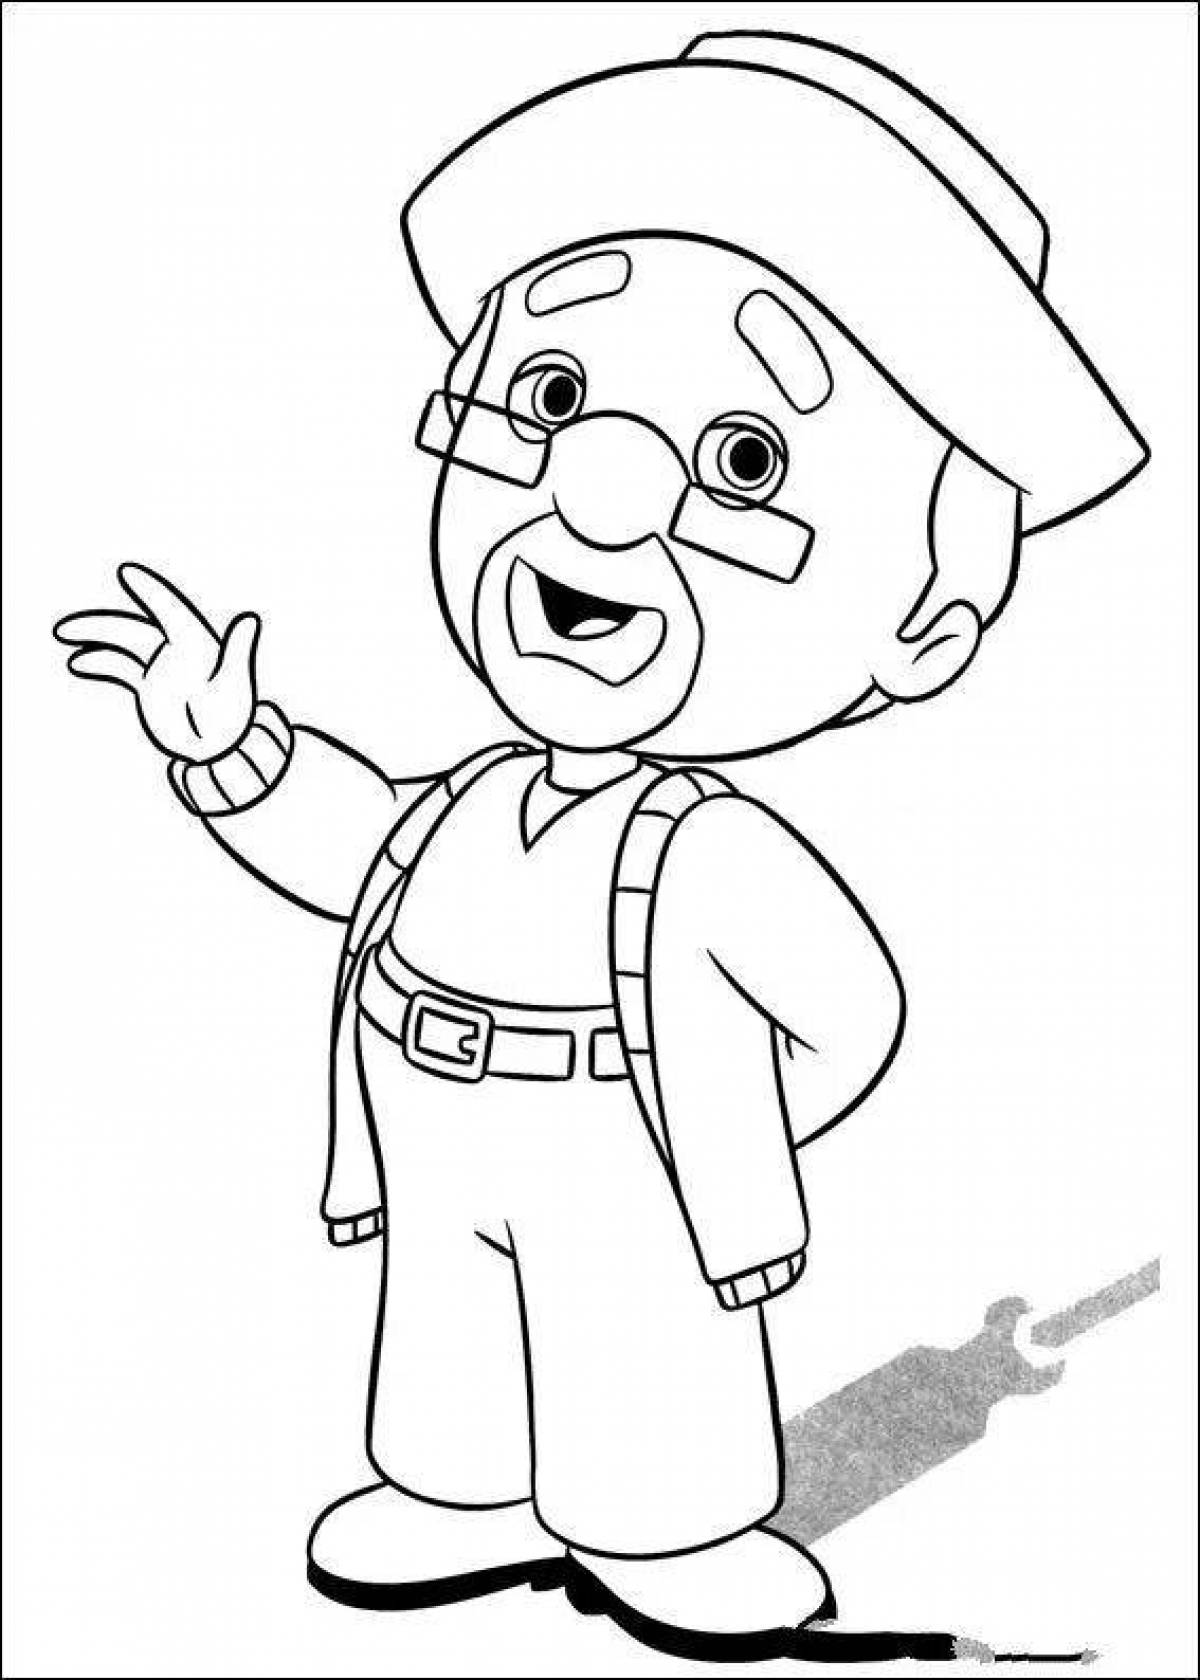 Playful cog coloring page